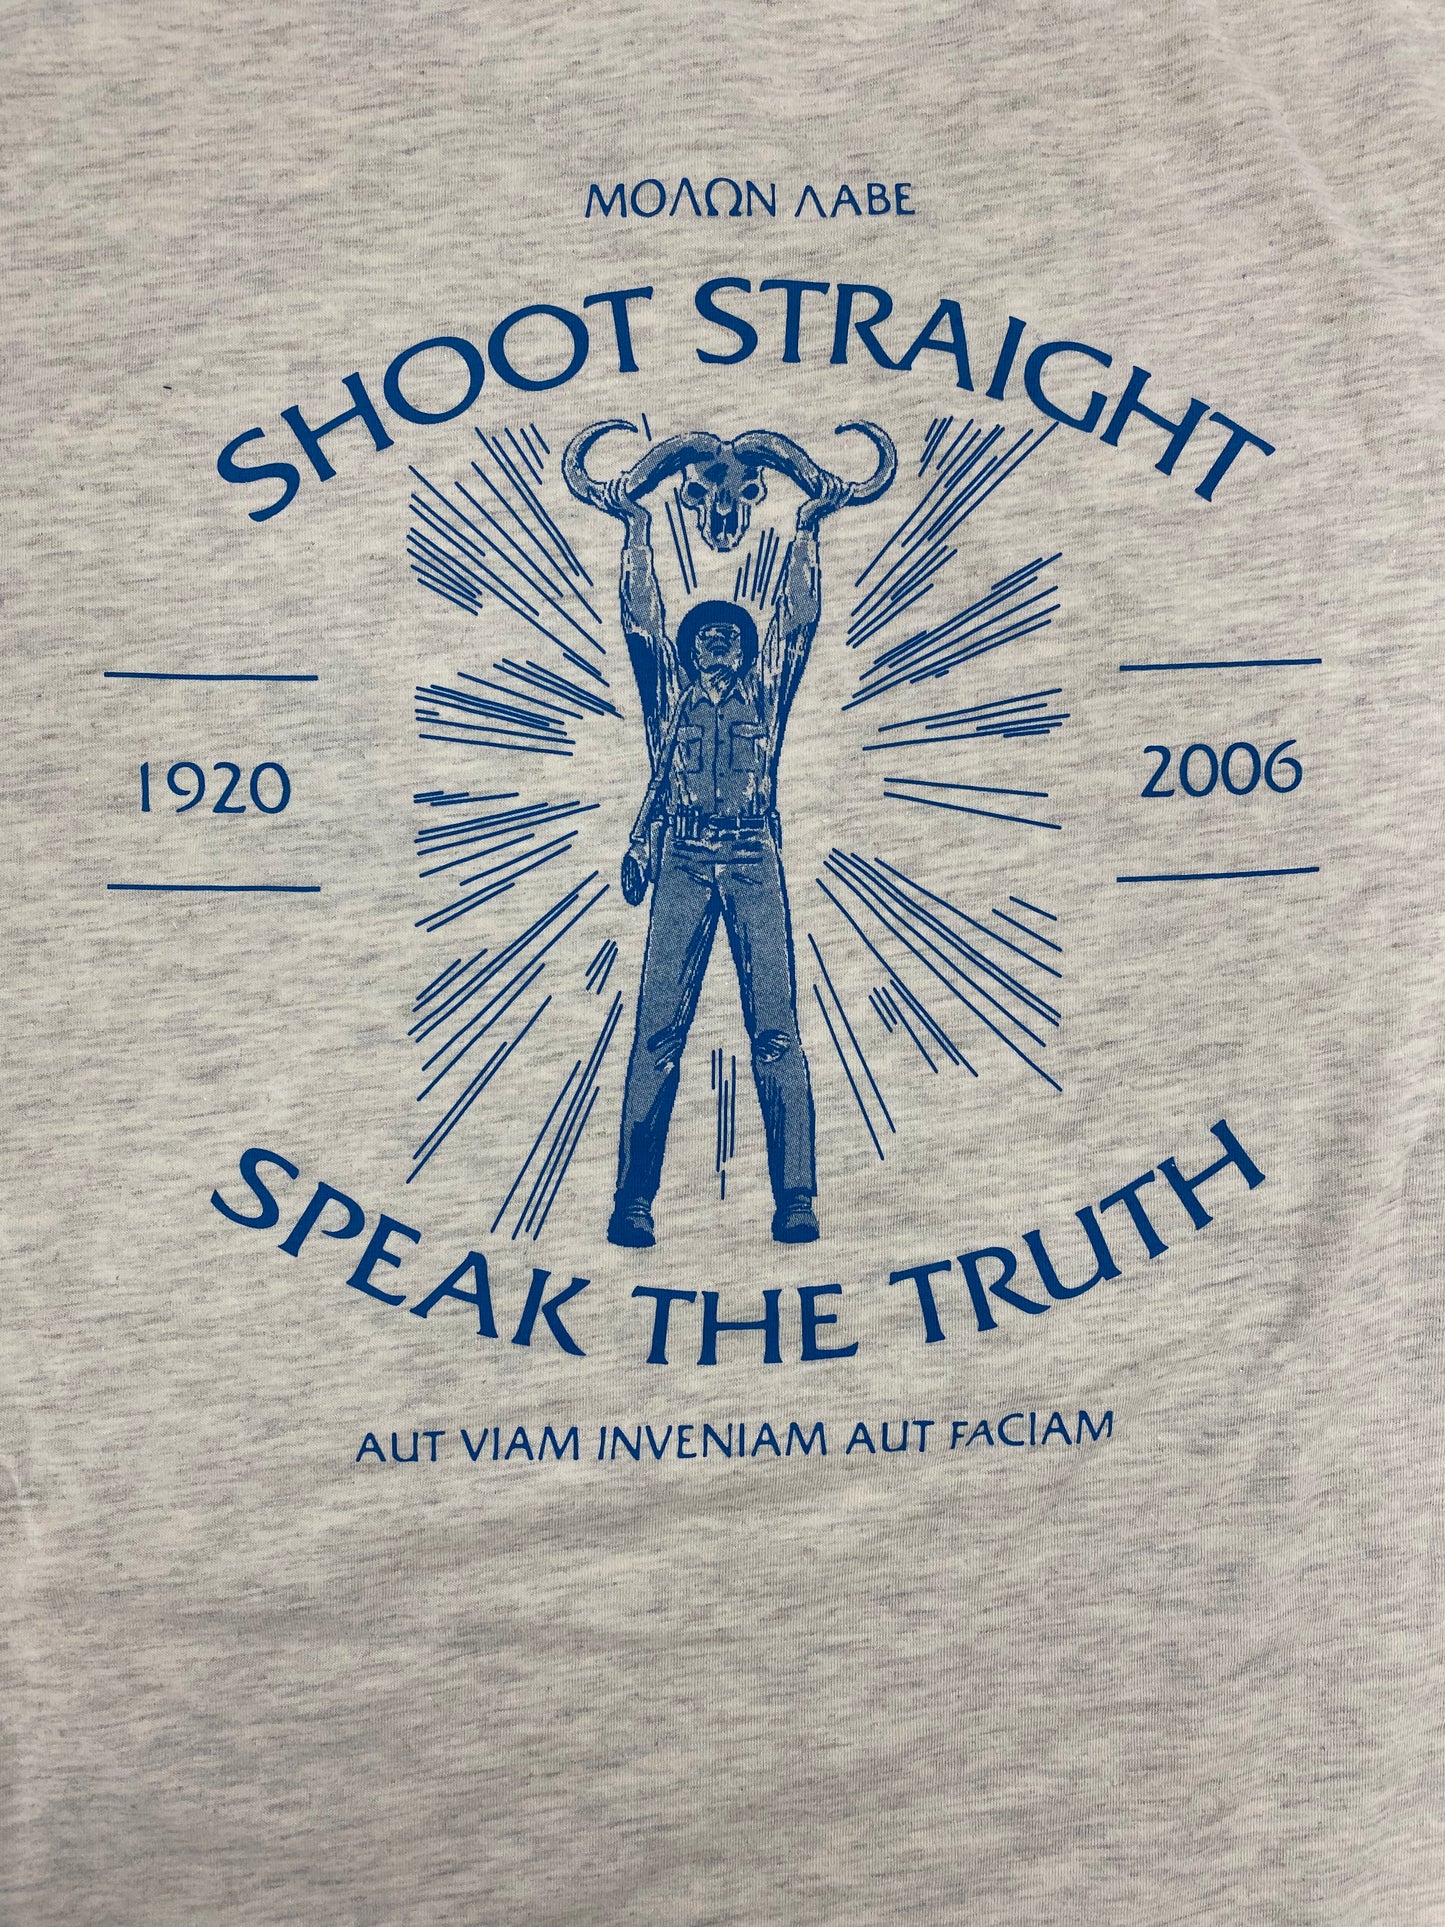 Shoot Straight/Speak the Truth T-Shirt Gray (Limited Edition)